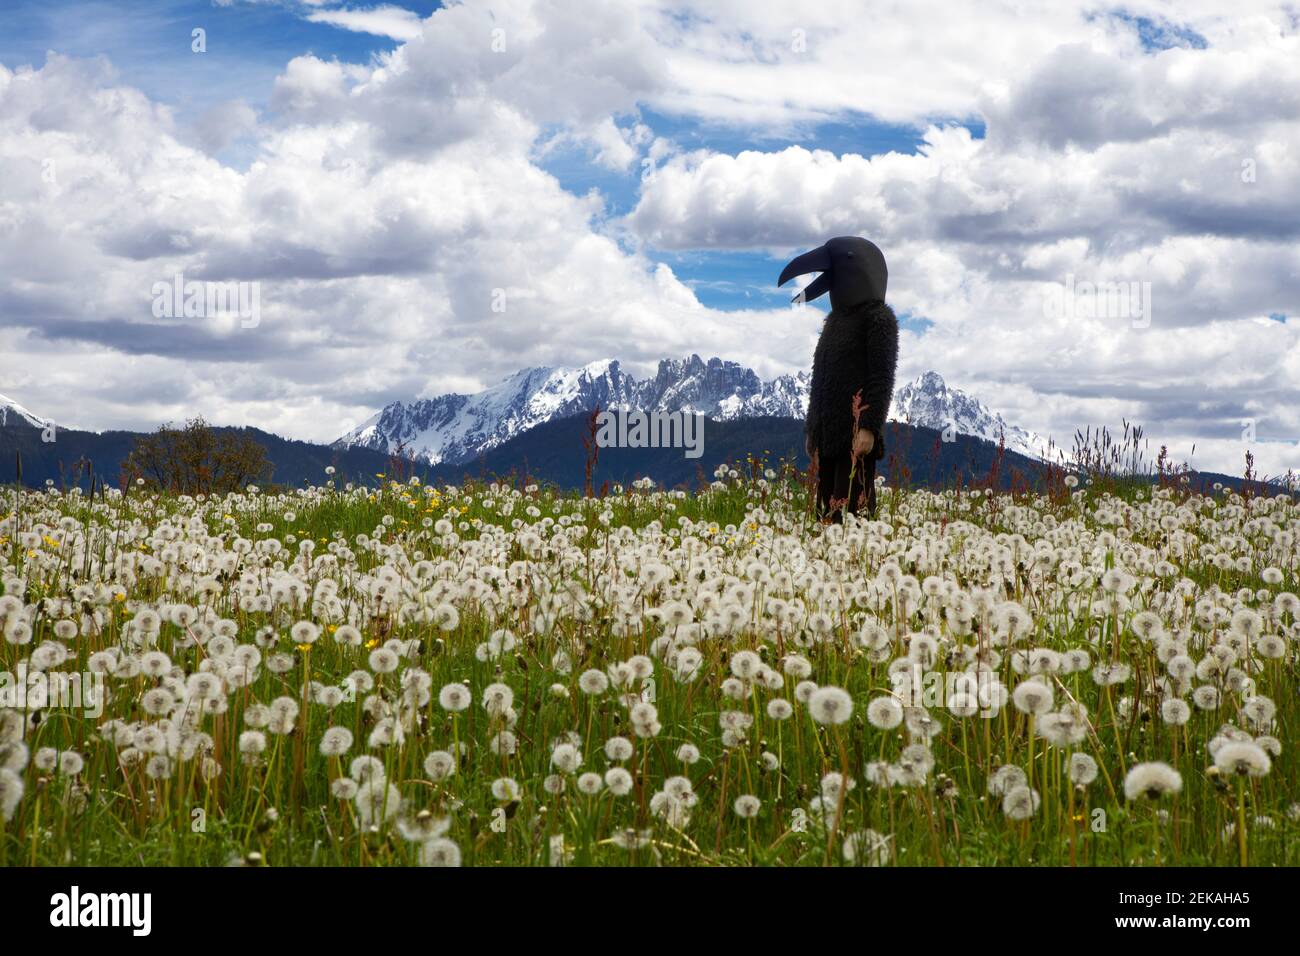 Woman wearing crow costume standing amidst meadow against cloudy sky Stock Photo